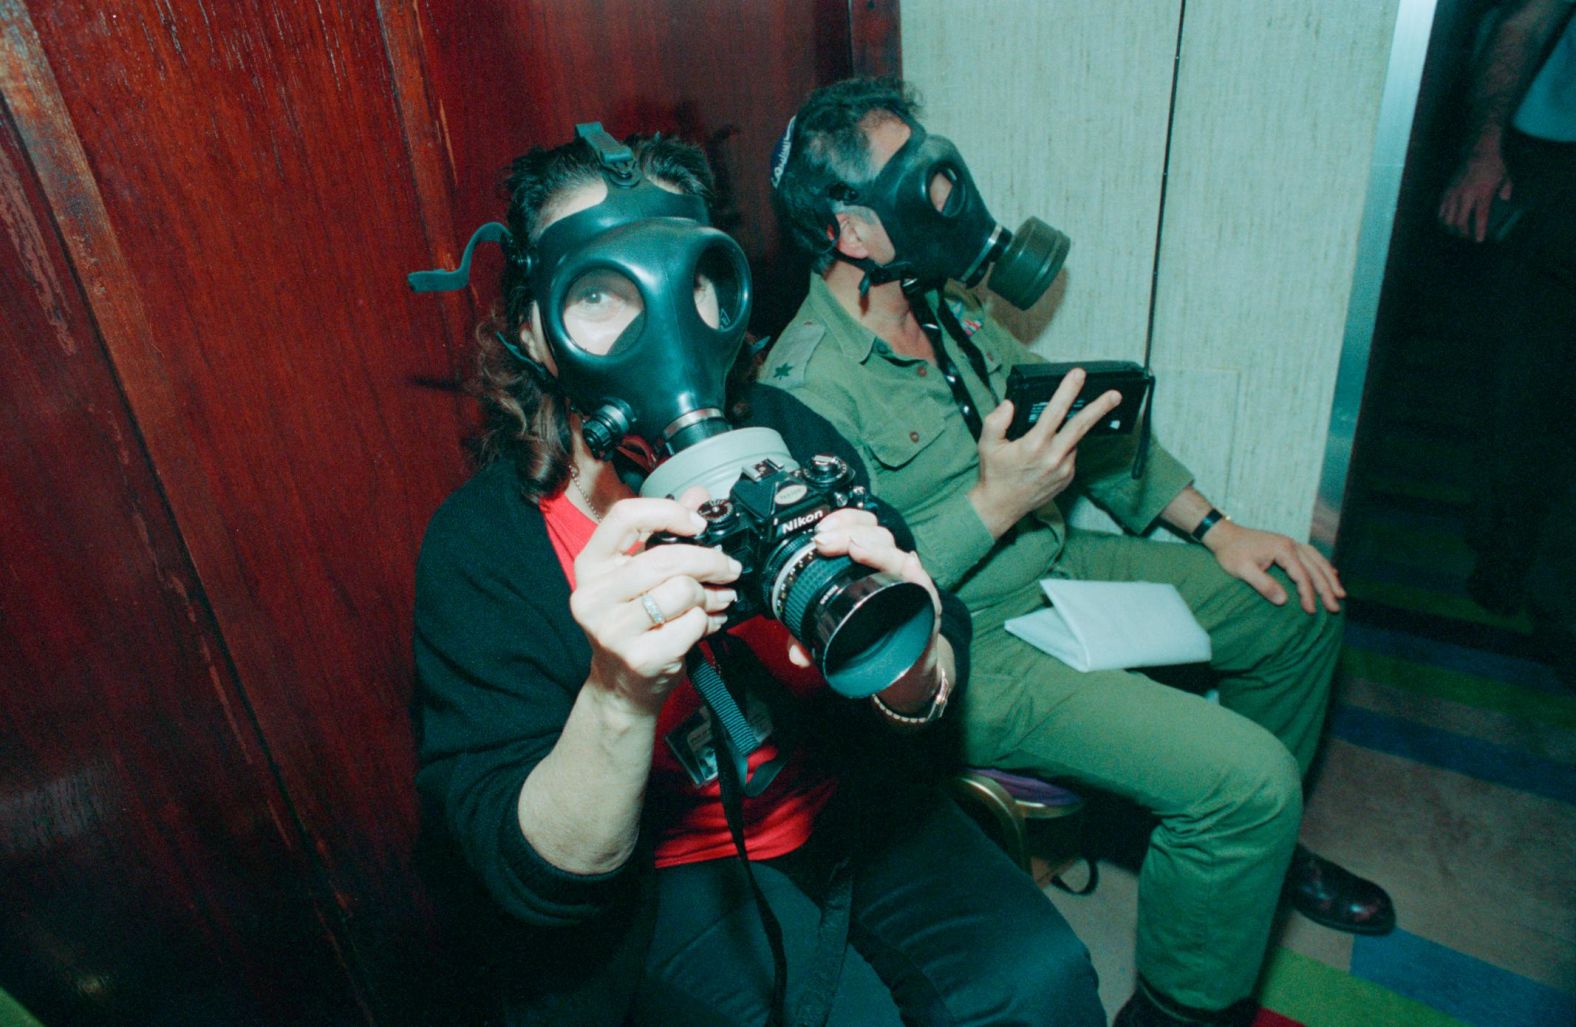 Sally Soames wears a gas mask in Israel following a missile attack by Iraq in 1991. The British photojournalist worked for The Observer and The Sunday Times newspapers, and her photos also appeared in other publications such as Newsweek and The New York Times. She worked in war zones but also took portraits of world leaders and celebrities such as Andy Warhol, Muhammad Ali and Sean Connery. When she photographed Ali, he told her <a href="index.php?page=&url=https%3A%2F%2Fwww.theguardian.com%2Fartanddesign%2F2019%2Foct%2F05%2Fnewspaper-photographer-sally-soames-dies-at-82" target="_blank" target="_blank">he had never met a female photographer before</a>.